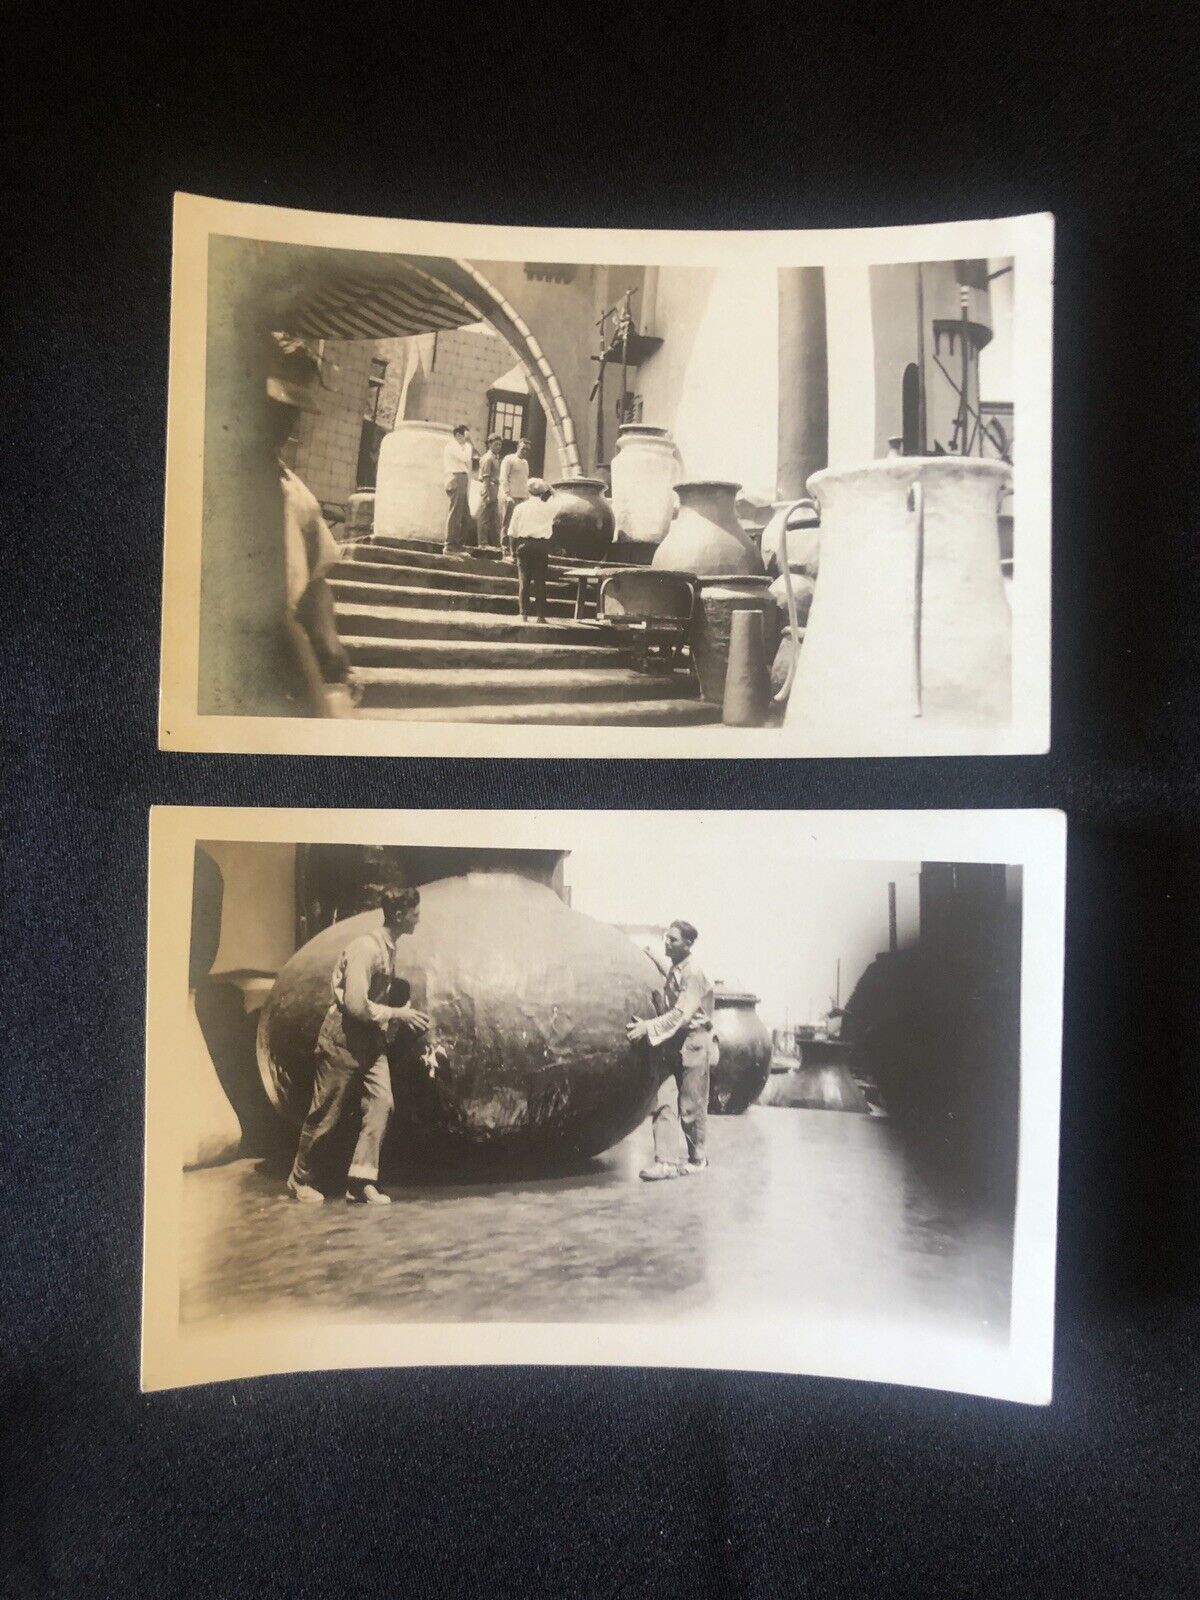 Antique 1920s Hollywood Film Movie Making Production on Set Crew Photos Lot of 2